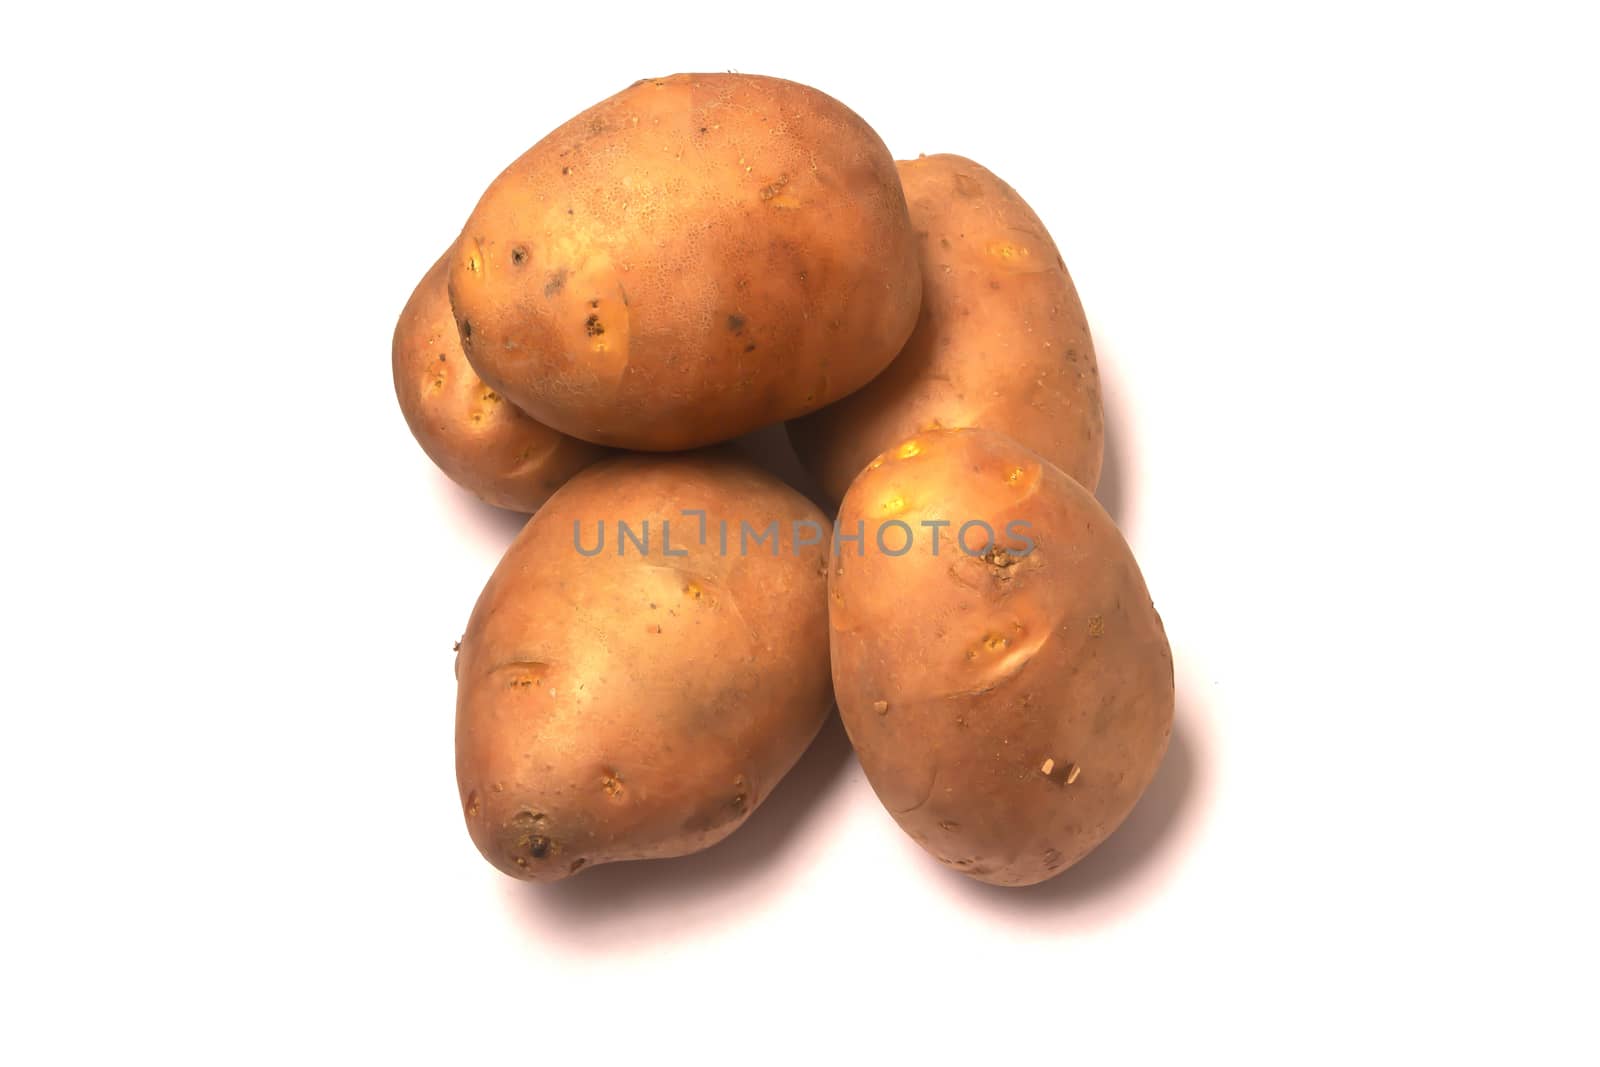 It's a potato. isolated on a white background.